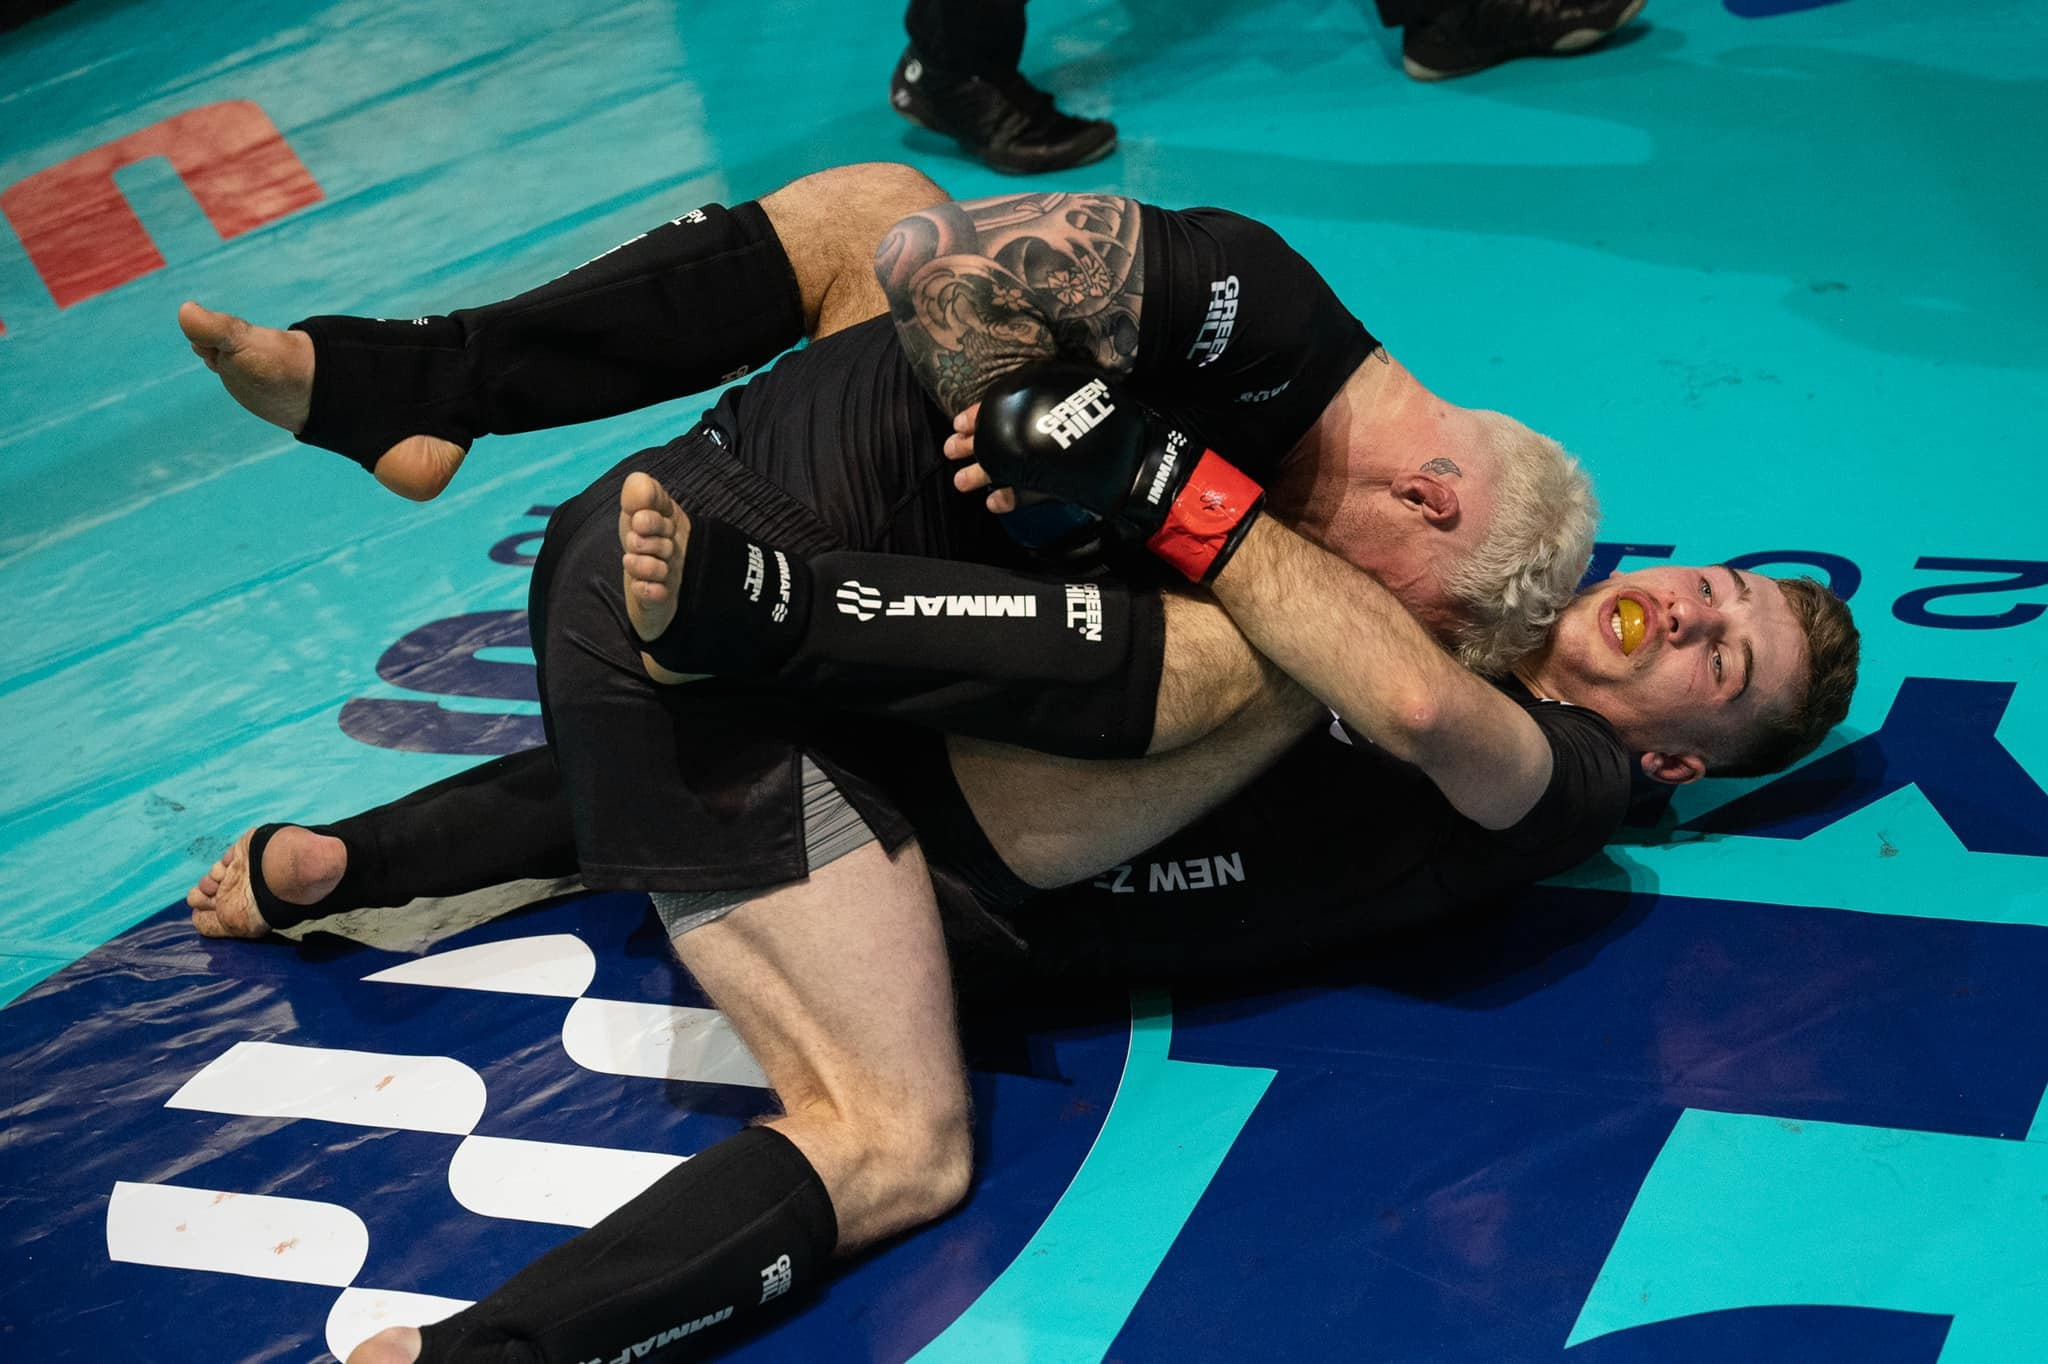 Fighters battled it out in semi-final matches yesterday but competition will now conclude as a national event ©IMMAF